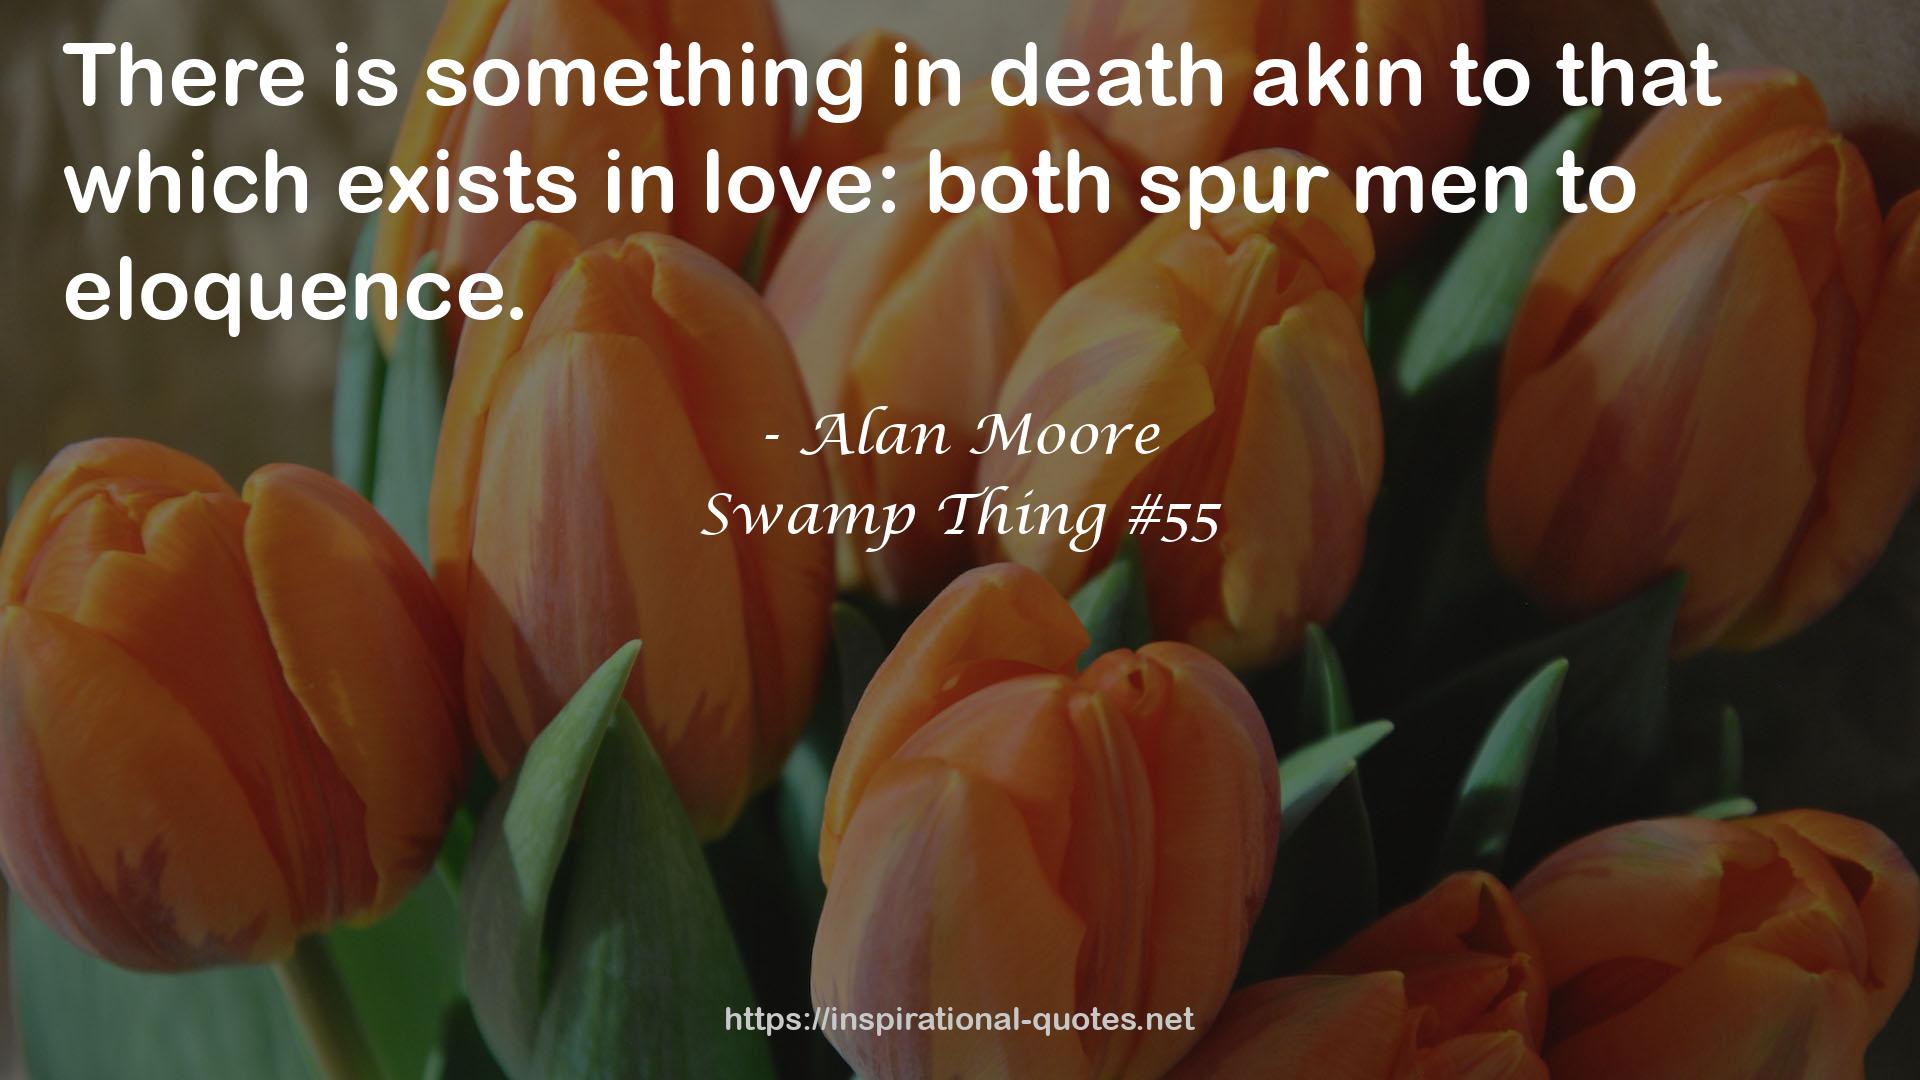 Swamp Thing #55 QUOTES